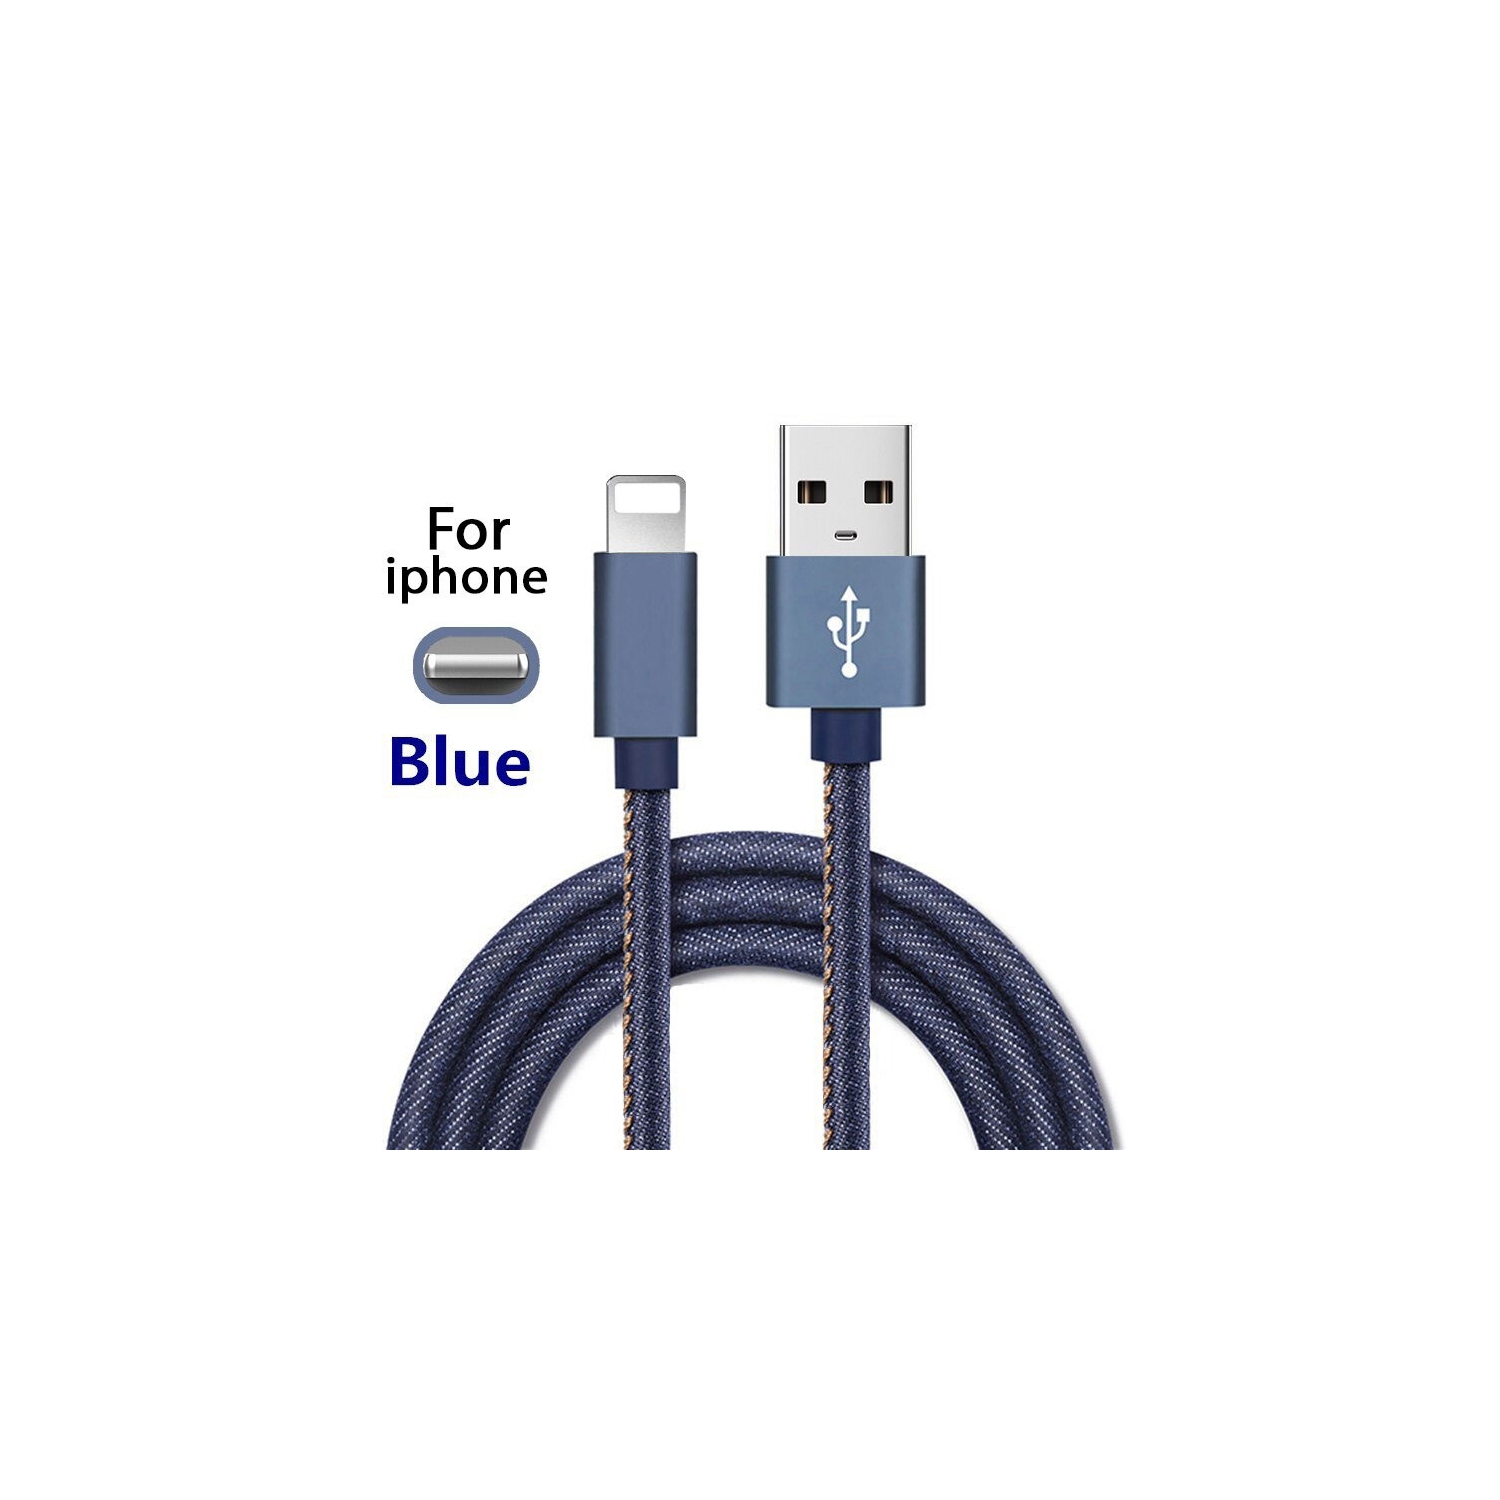 3ft iPhone Charger Cable for Apple Lightning Charging Cord for iPhone 14/13/12/11/X/Xs Max/XR/8 Plus/7/6/6s/SE/5c/5s/5 iPad Air 2/Mini USB